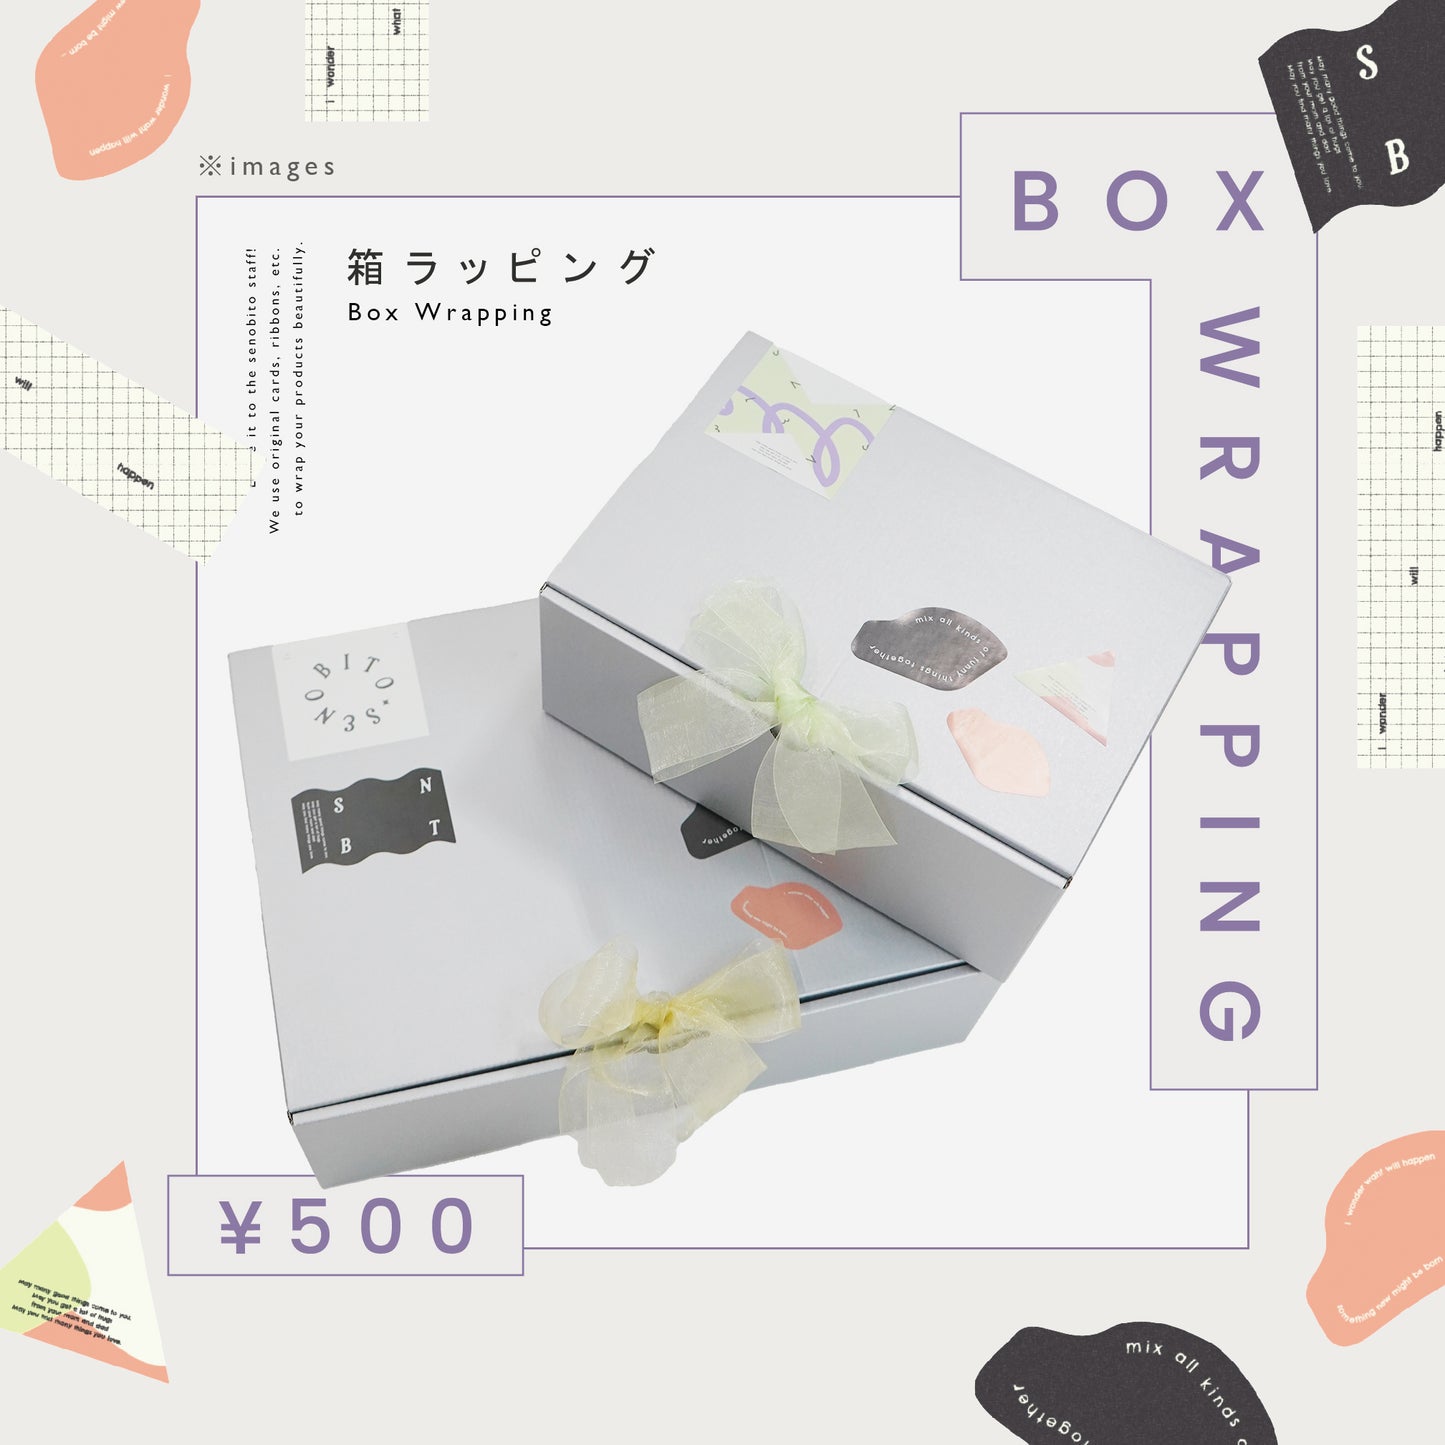 BOX WRAPPING - 箱ラッピング